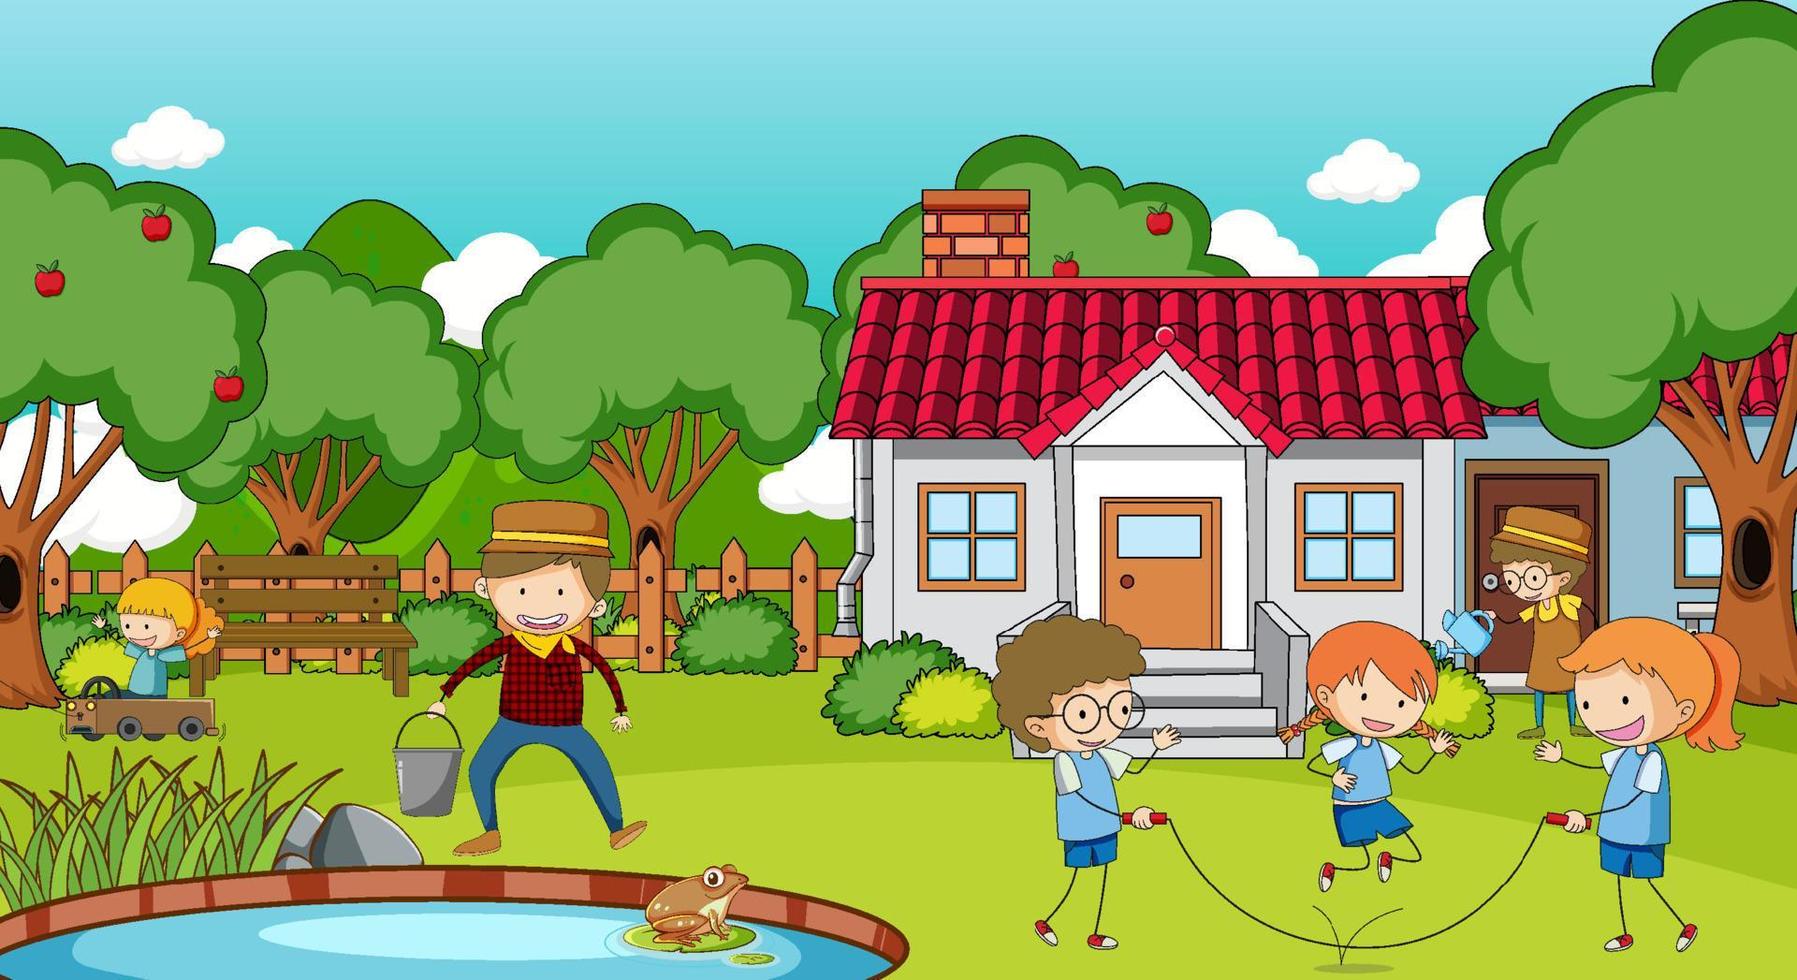 A simple house with kids  in nature background vector